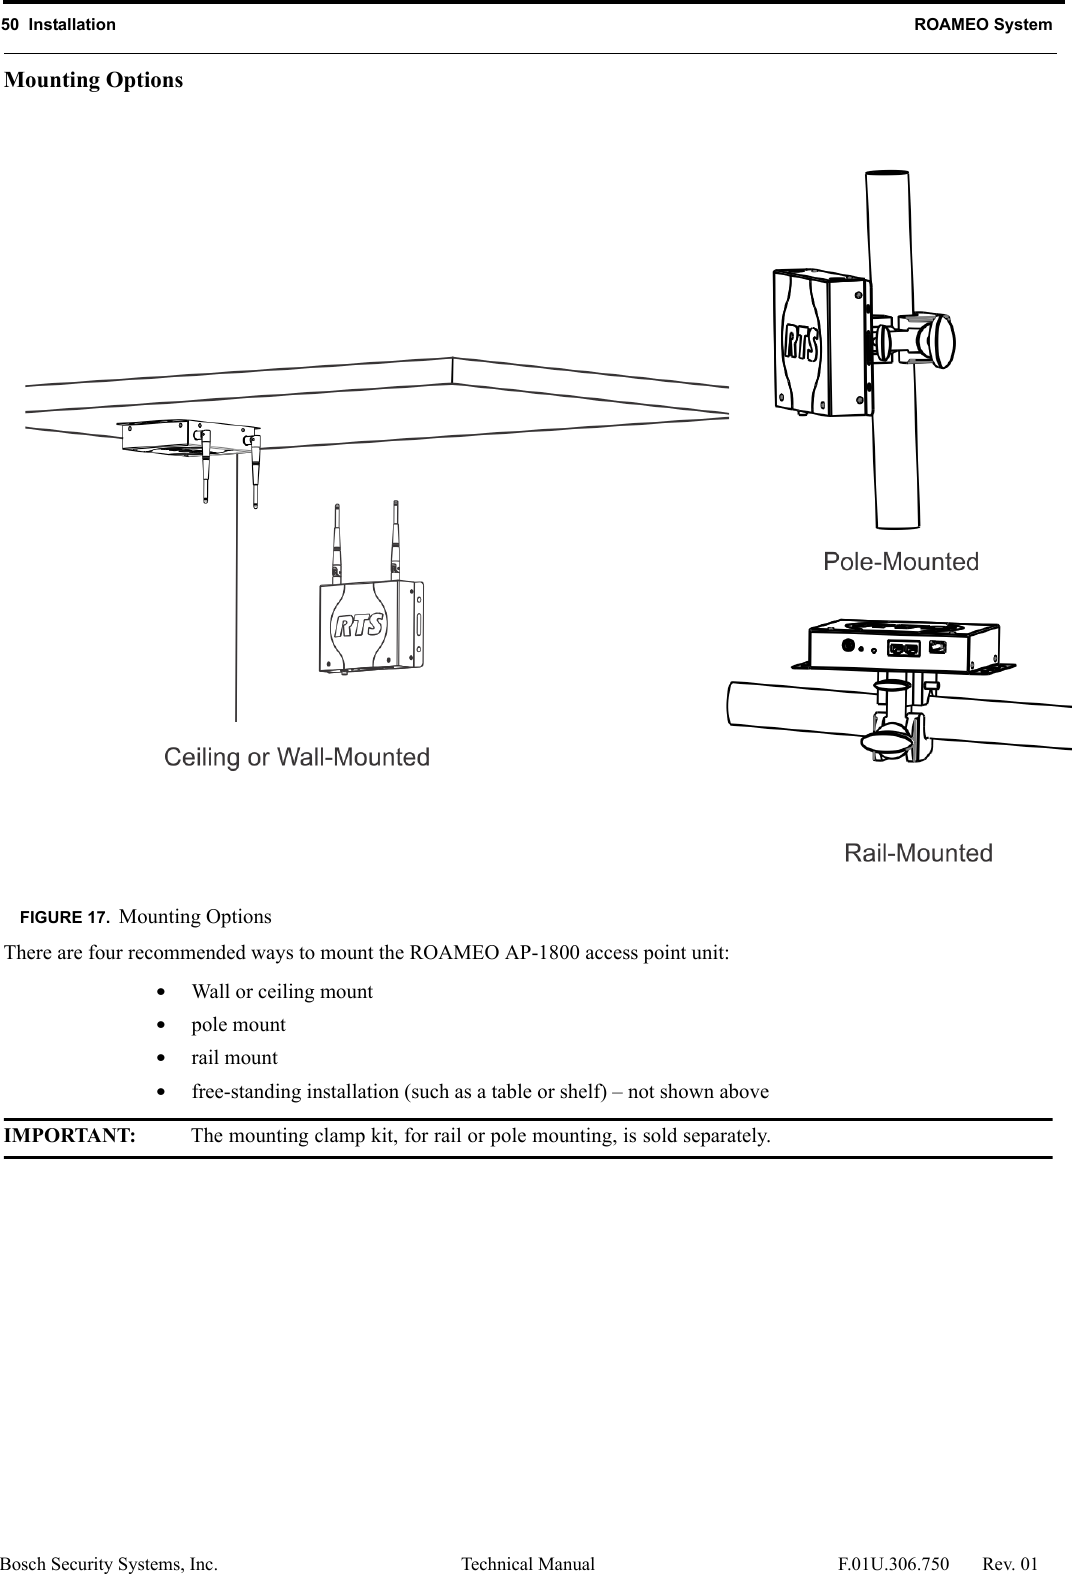 50  Installation ROAMEO SystemBosch Security Systems, Inc. Technical Manual  F.01U.306.750 Rev. 01Mounting OptionsThere are four recommended ways to mount the ROAMEO AP-1800 access point unit:•Wall or ceiling mount•pole mount•rail mount•free-standing installation (such as a table or shelf) – not shown aboveIMPORTANT: The mounting clamp kit, for rail or pole mounting, is sold separately.FIGURE 17. Mounting Options